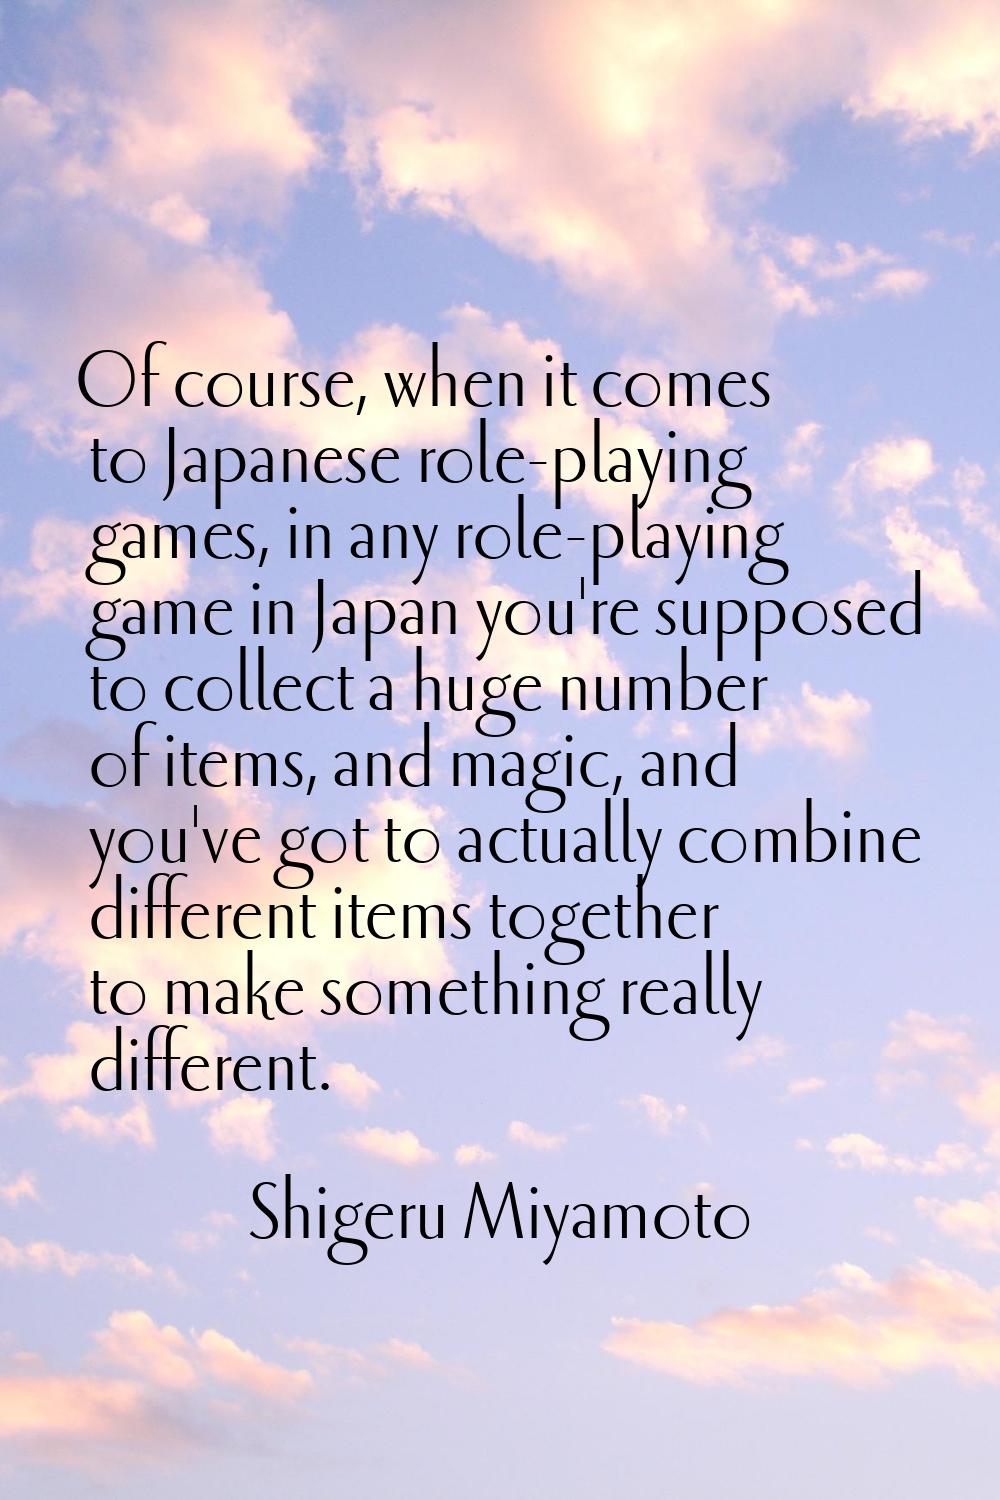 Of course, when it comes to Japanese role-playing games, in any role-playing game in Japan you're s